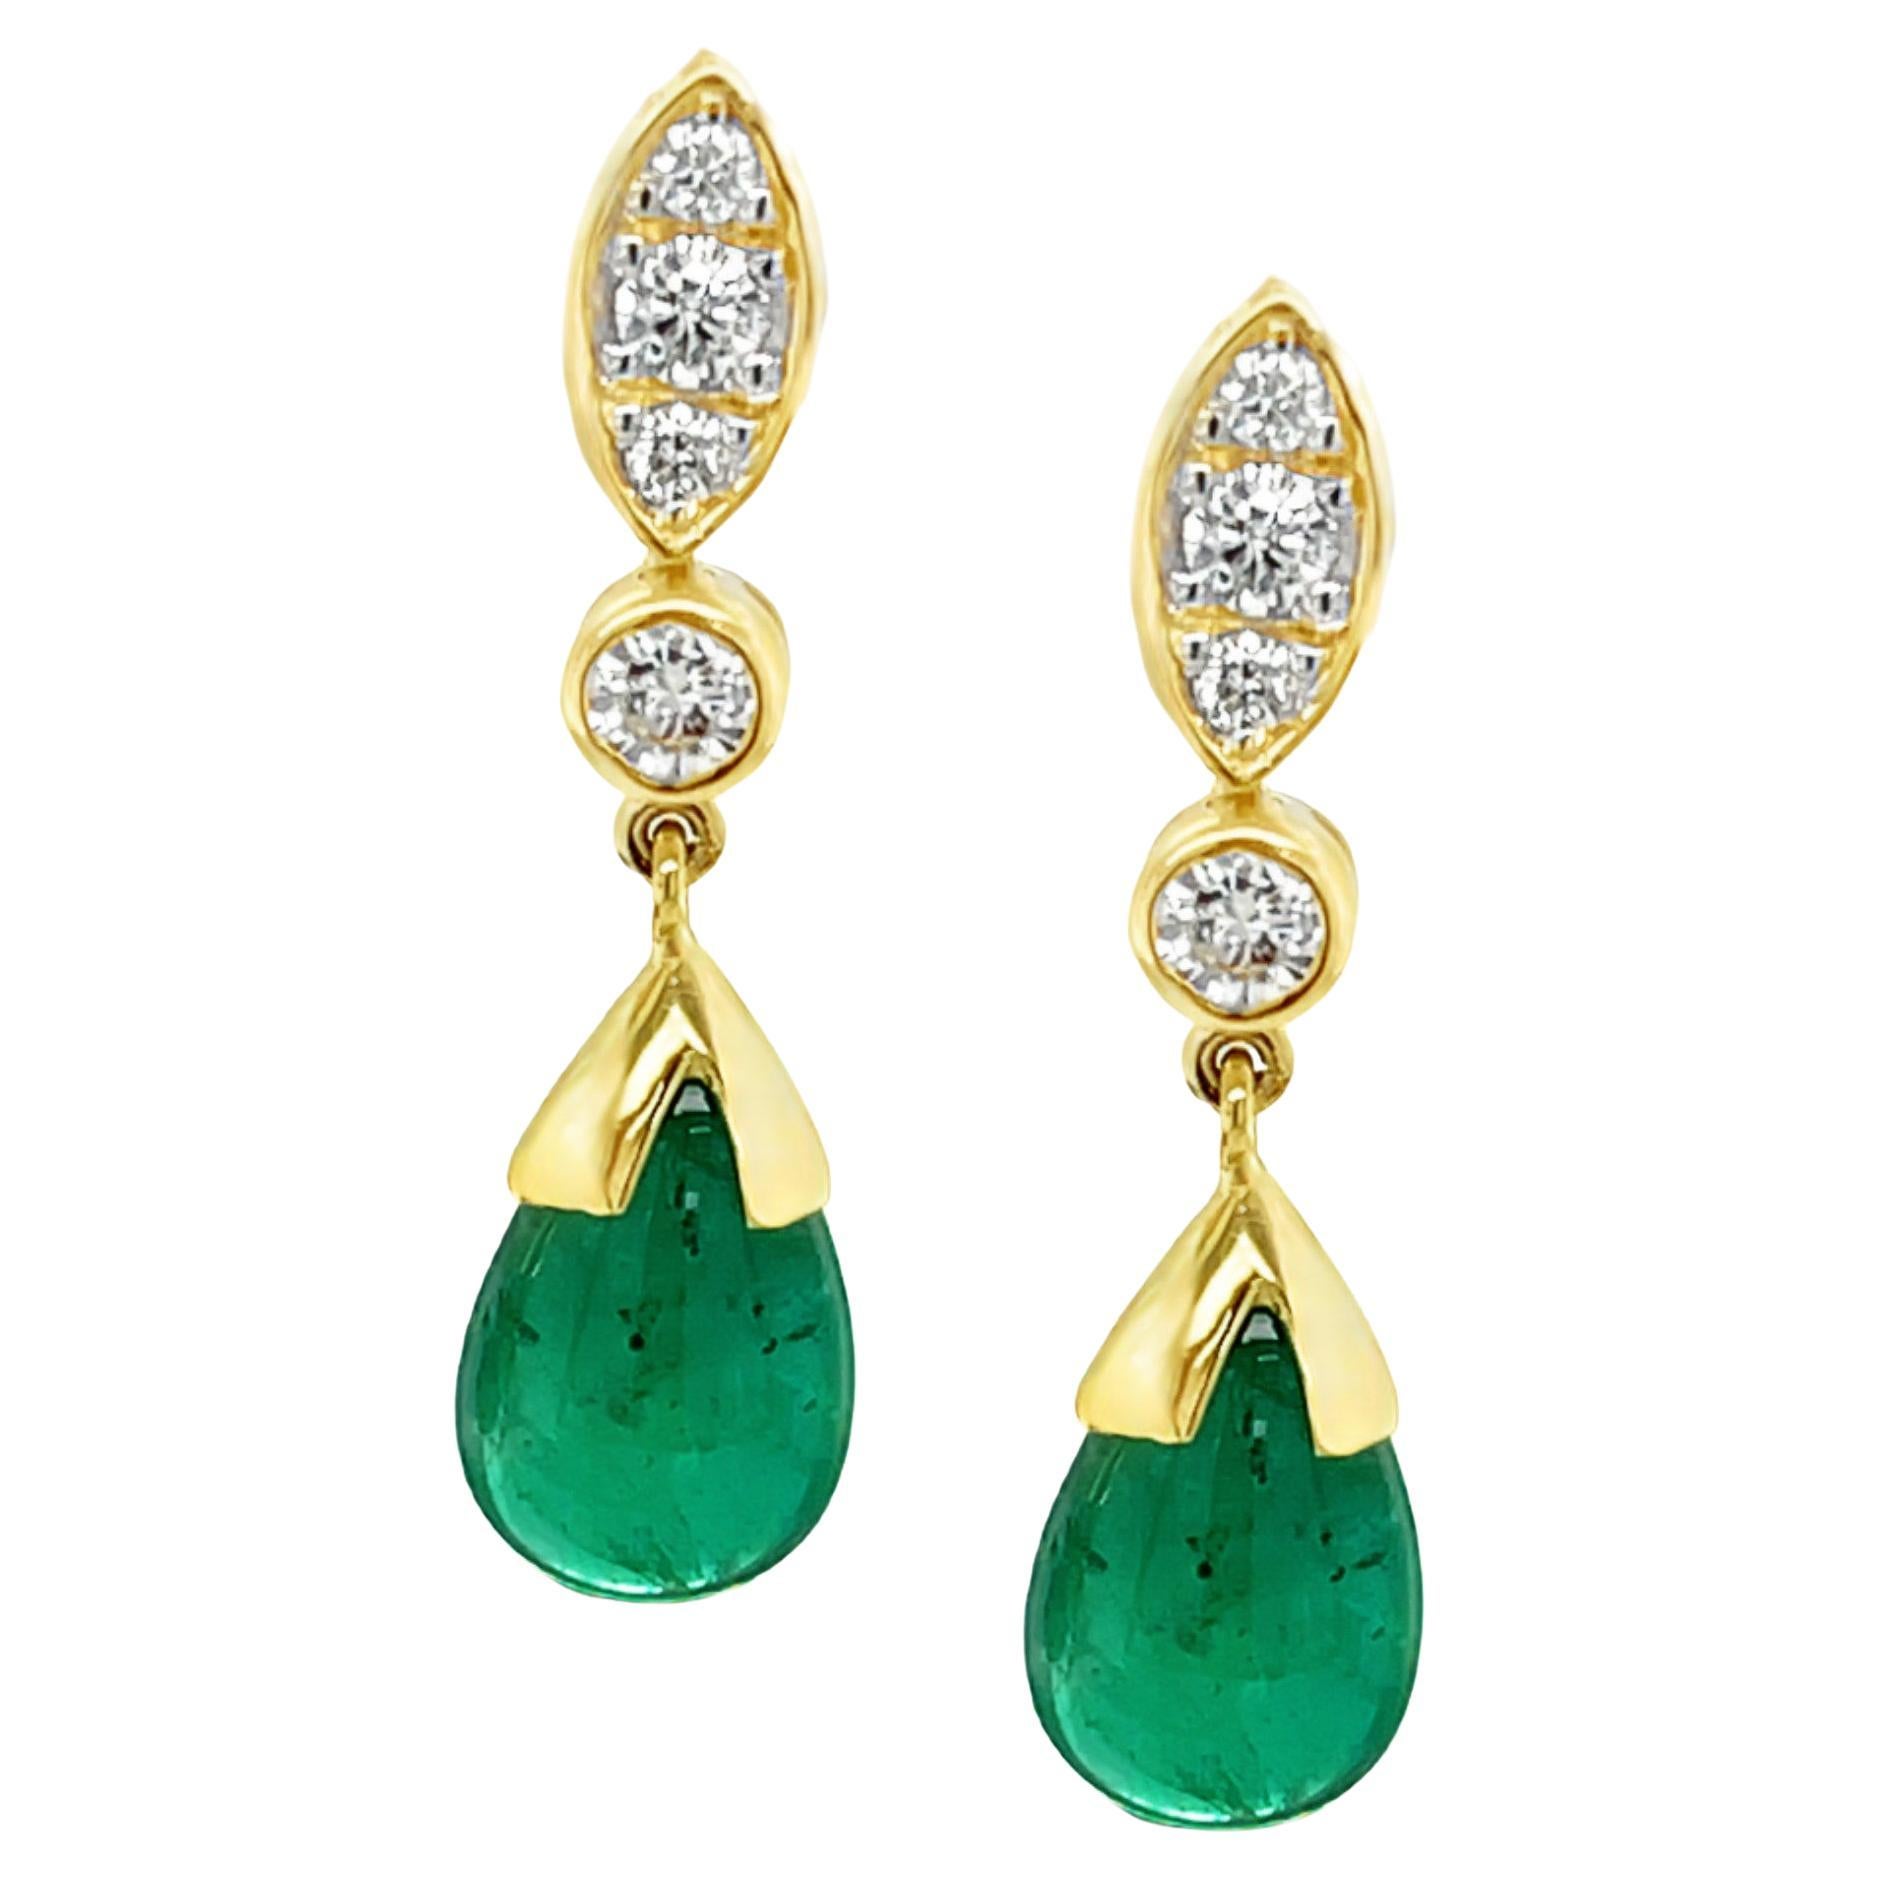 Emerald Drop and Diamond Dangle Earrings in Yellow Gold, 6.83 Carats Total For Sale